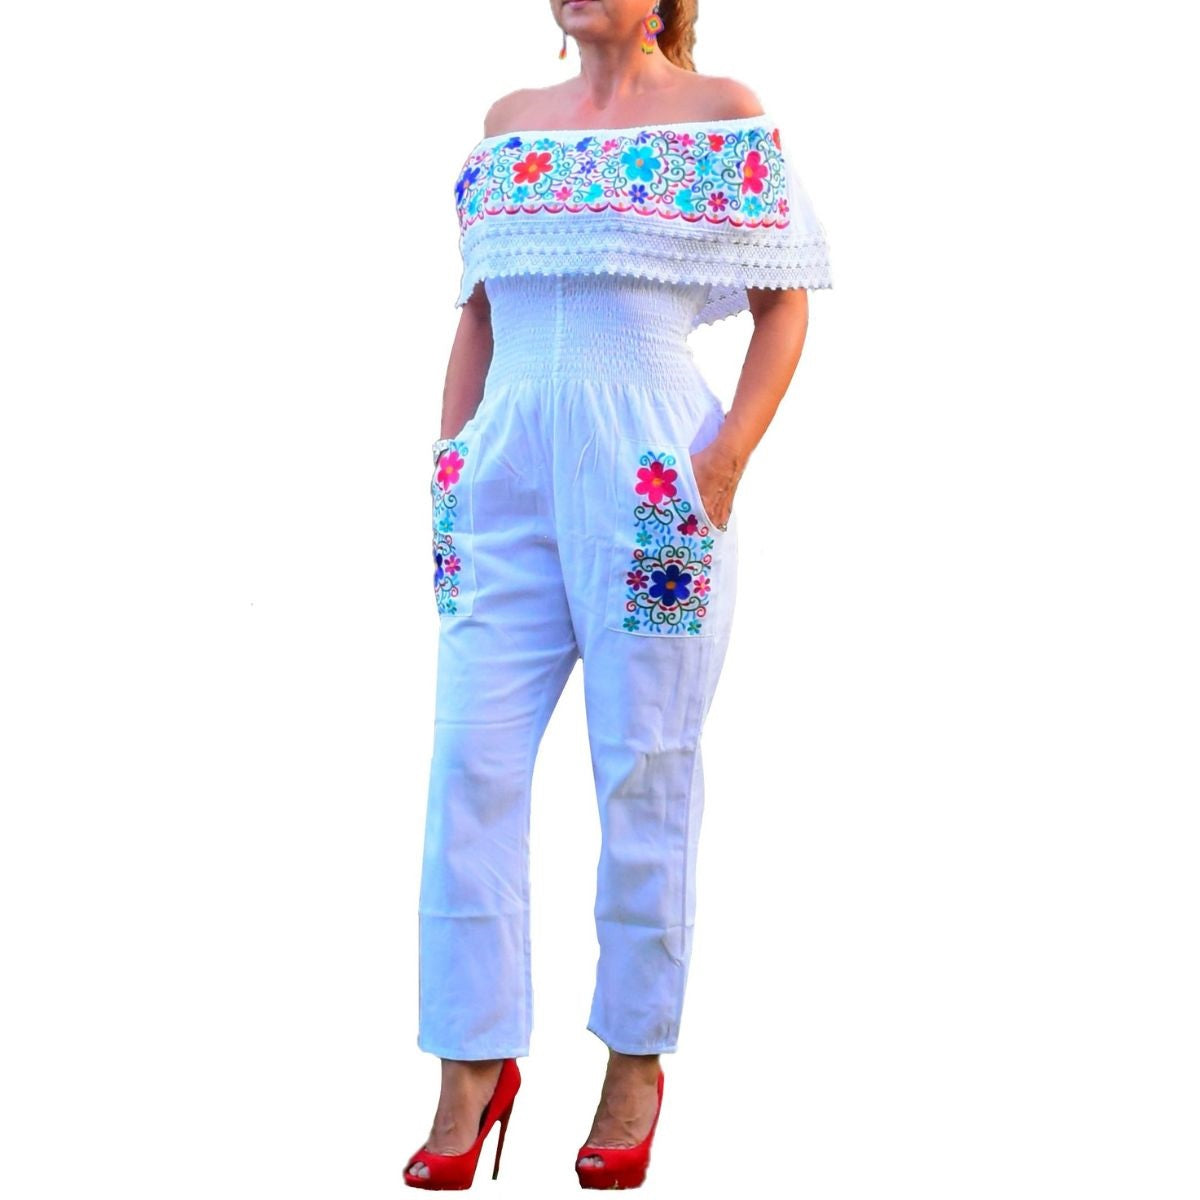 Mexican Embroidered Jumper NA-TM-79005-F White 